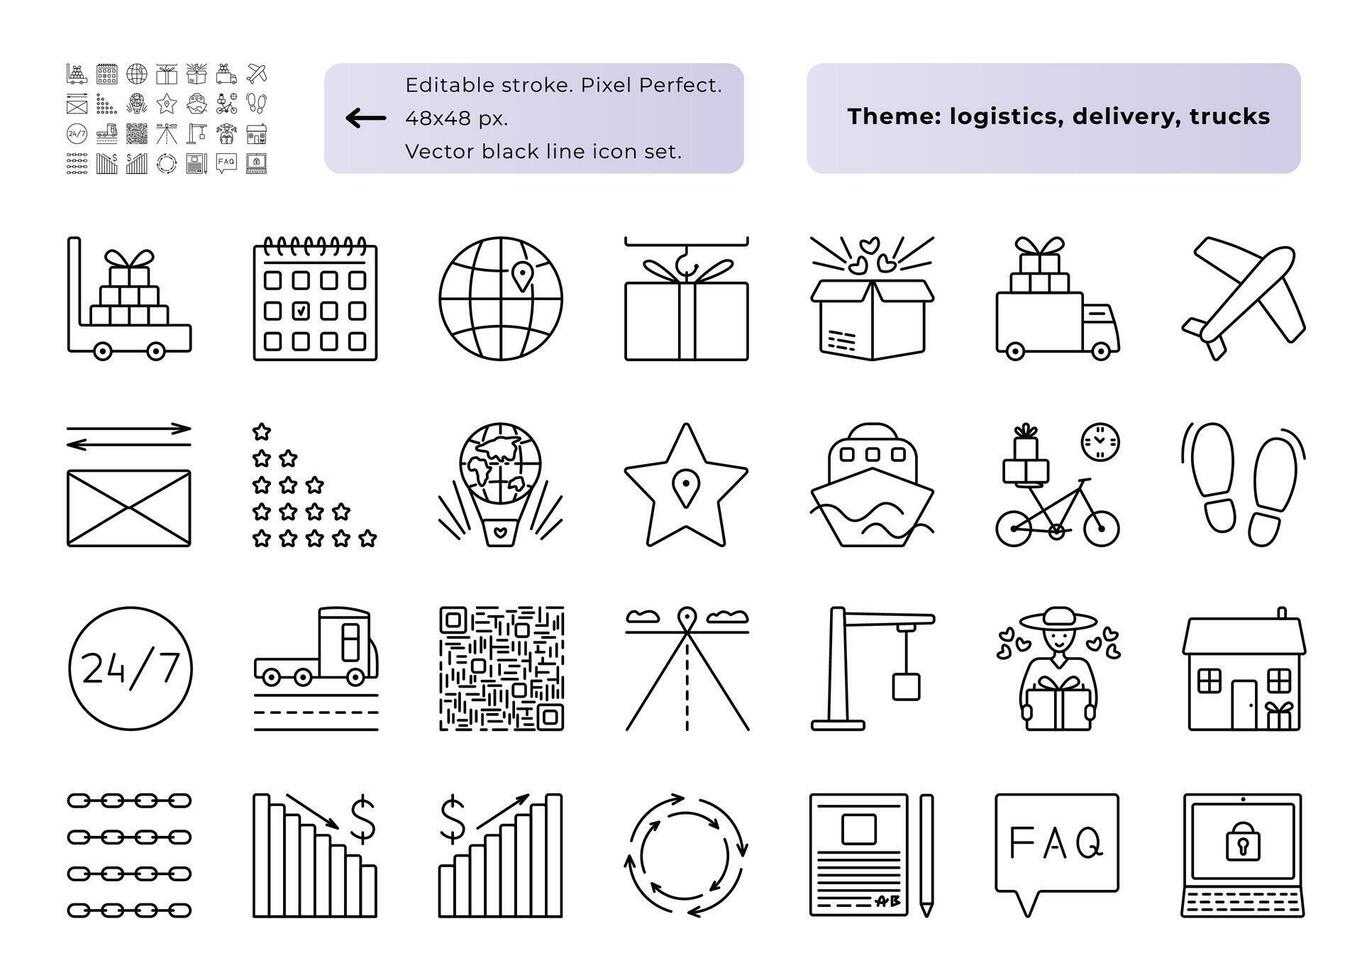 Logistics and cargo. Black line icon set, 28 signs 48x48 px editable stroke, pixel perfect and 300x300 px not editable stroke, pixel perfect vector